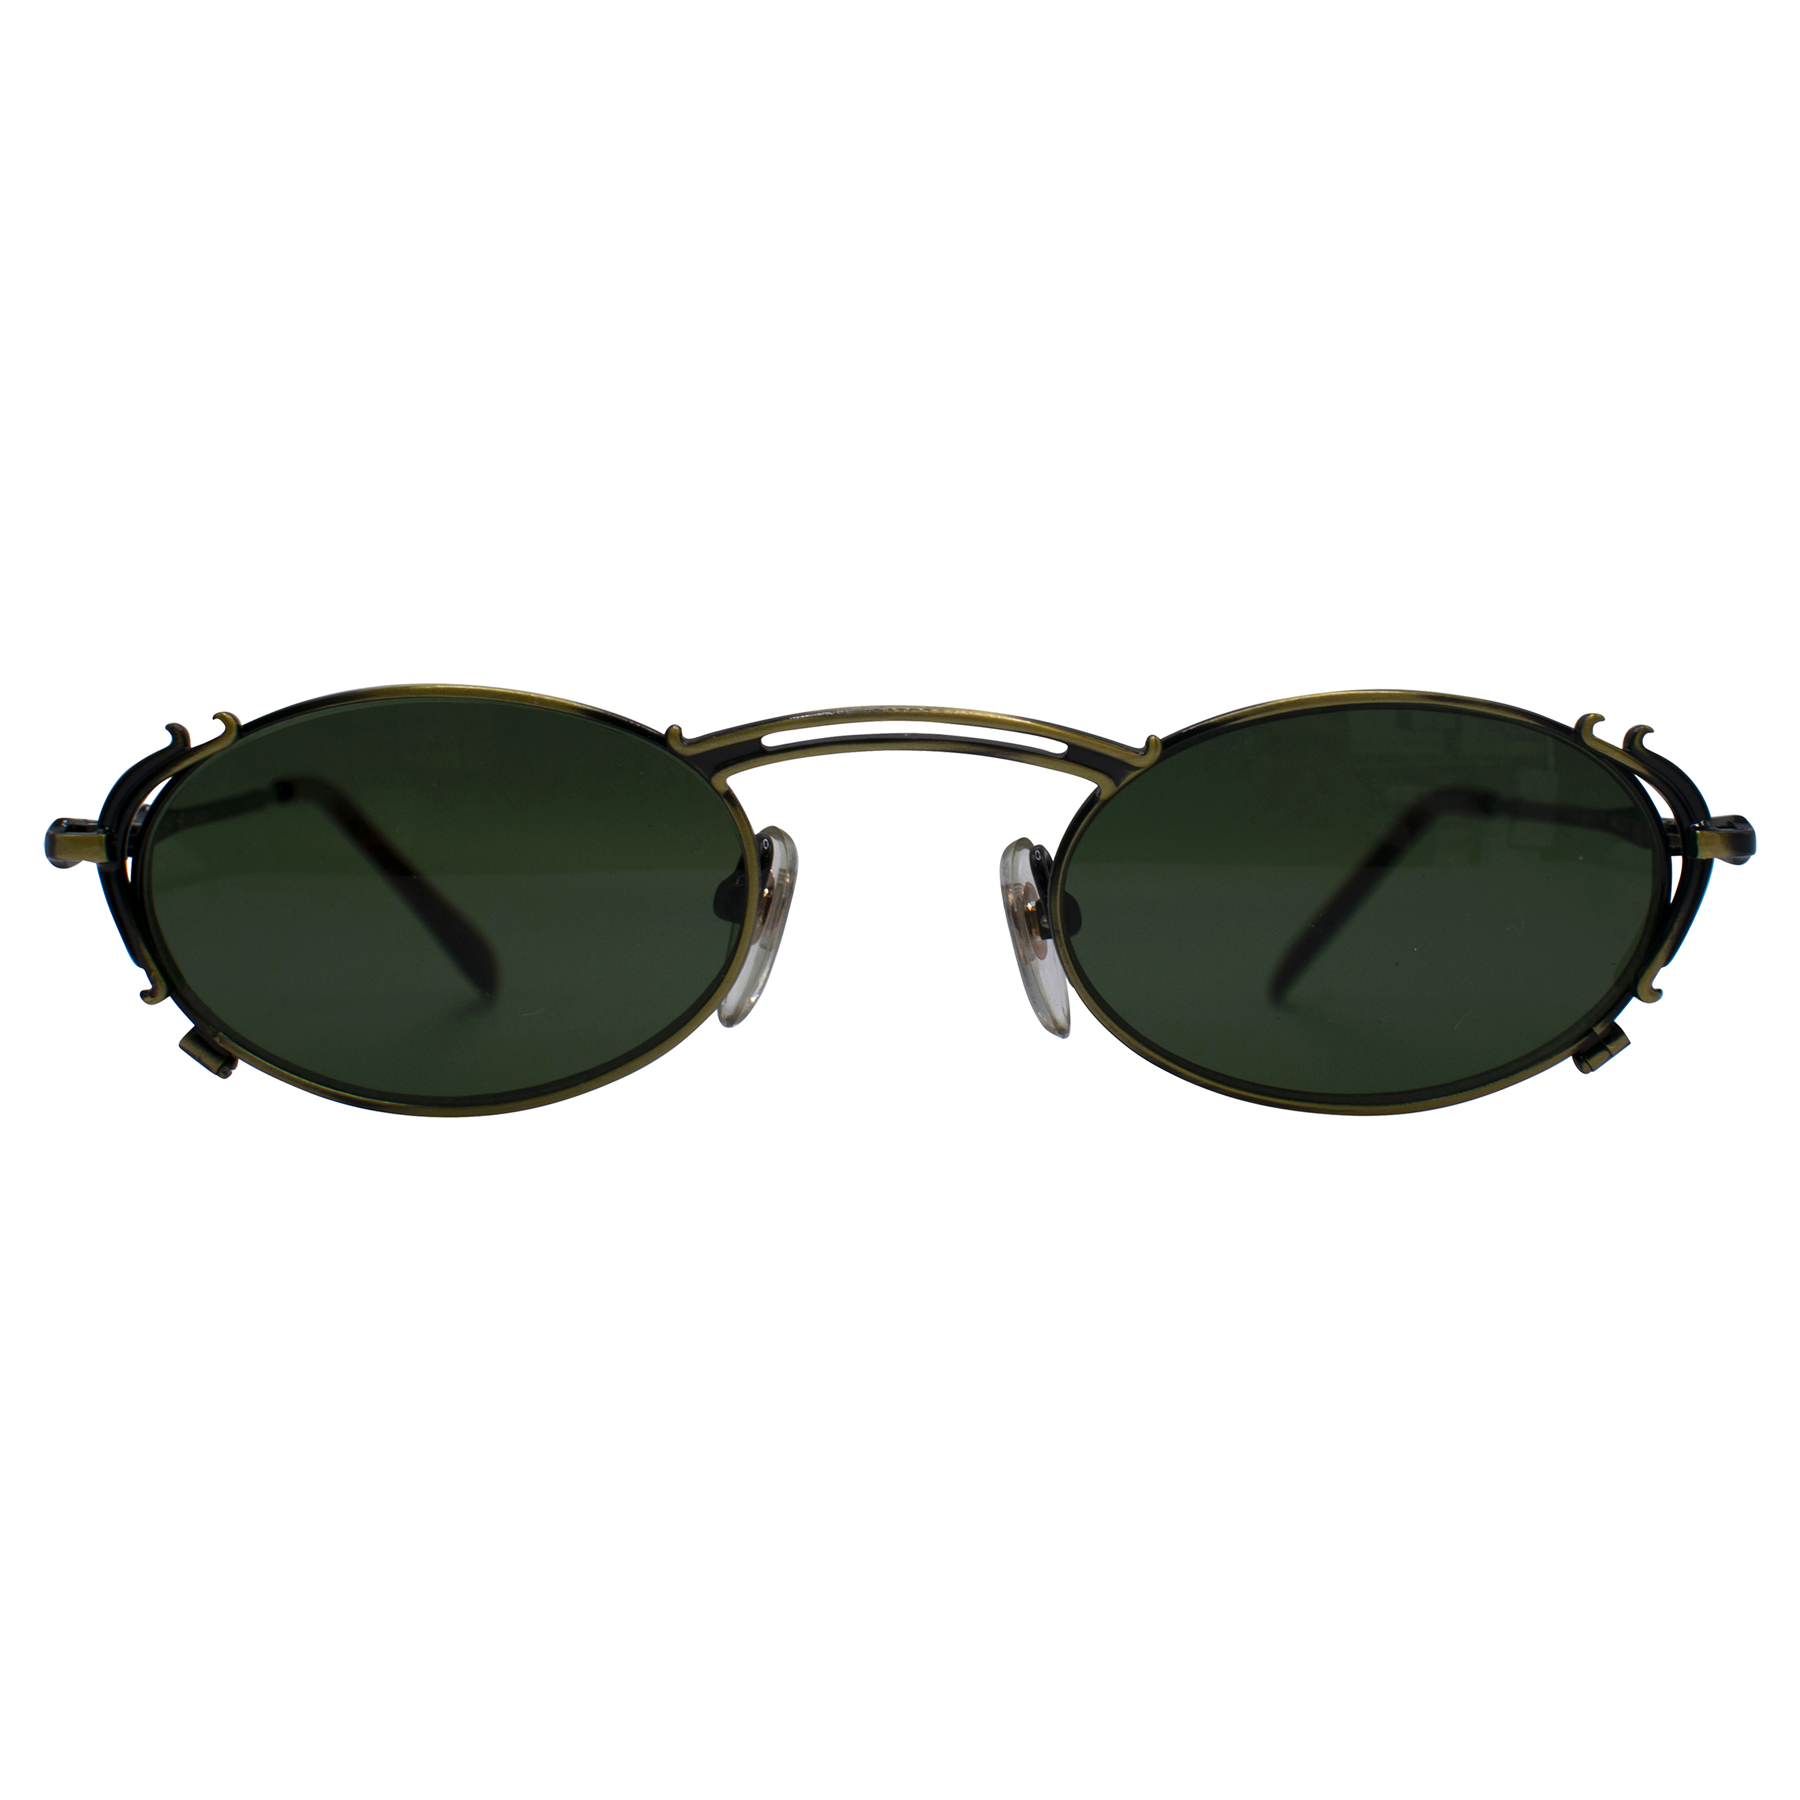 GENTLE Small Oval Sunglasses